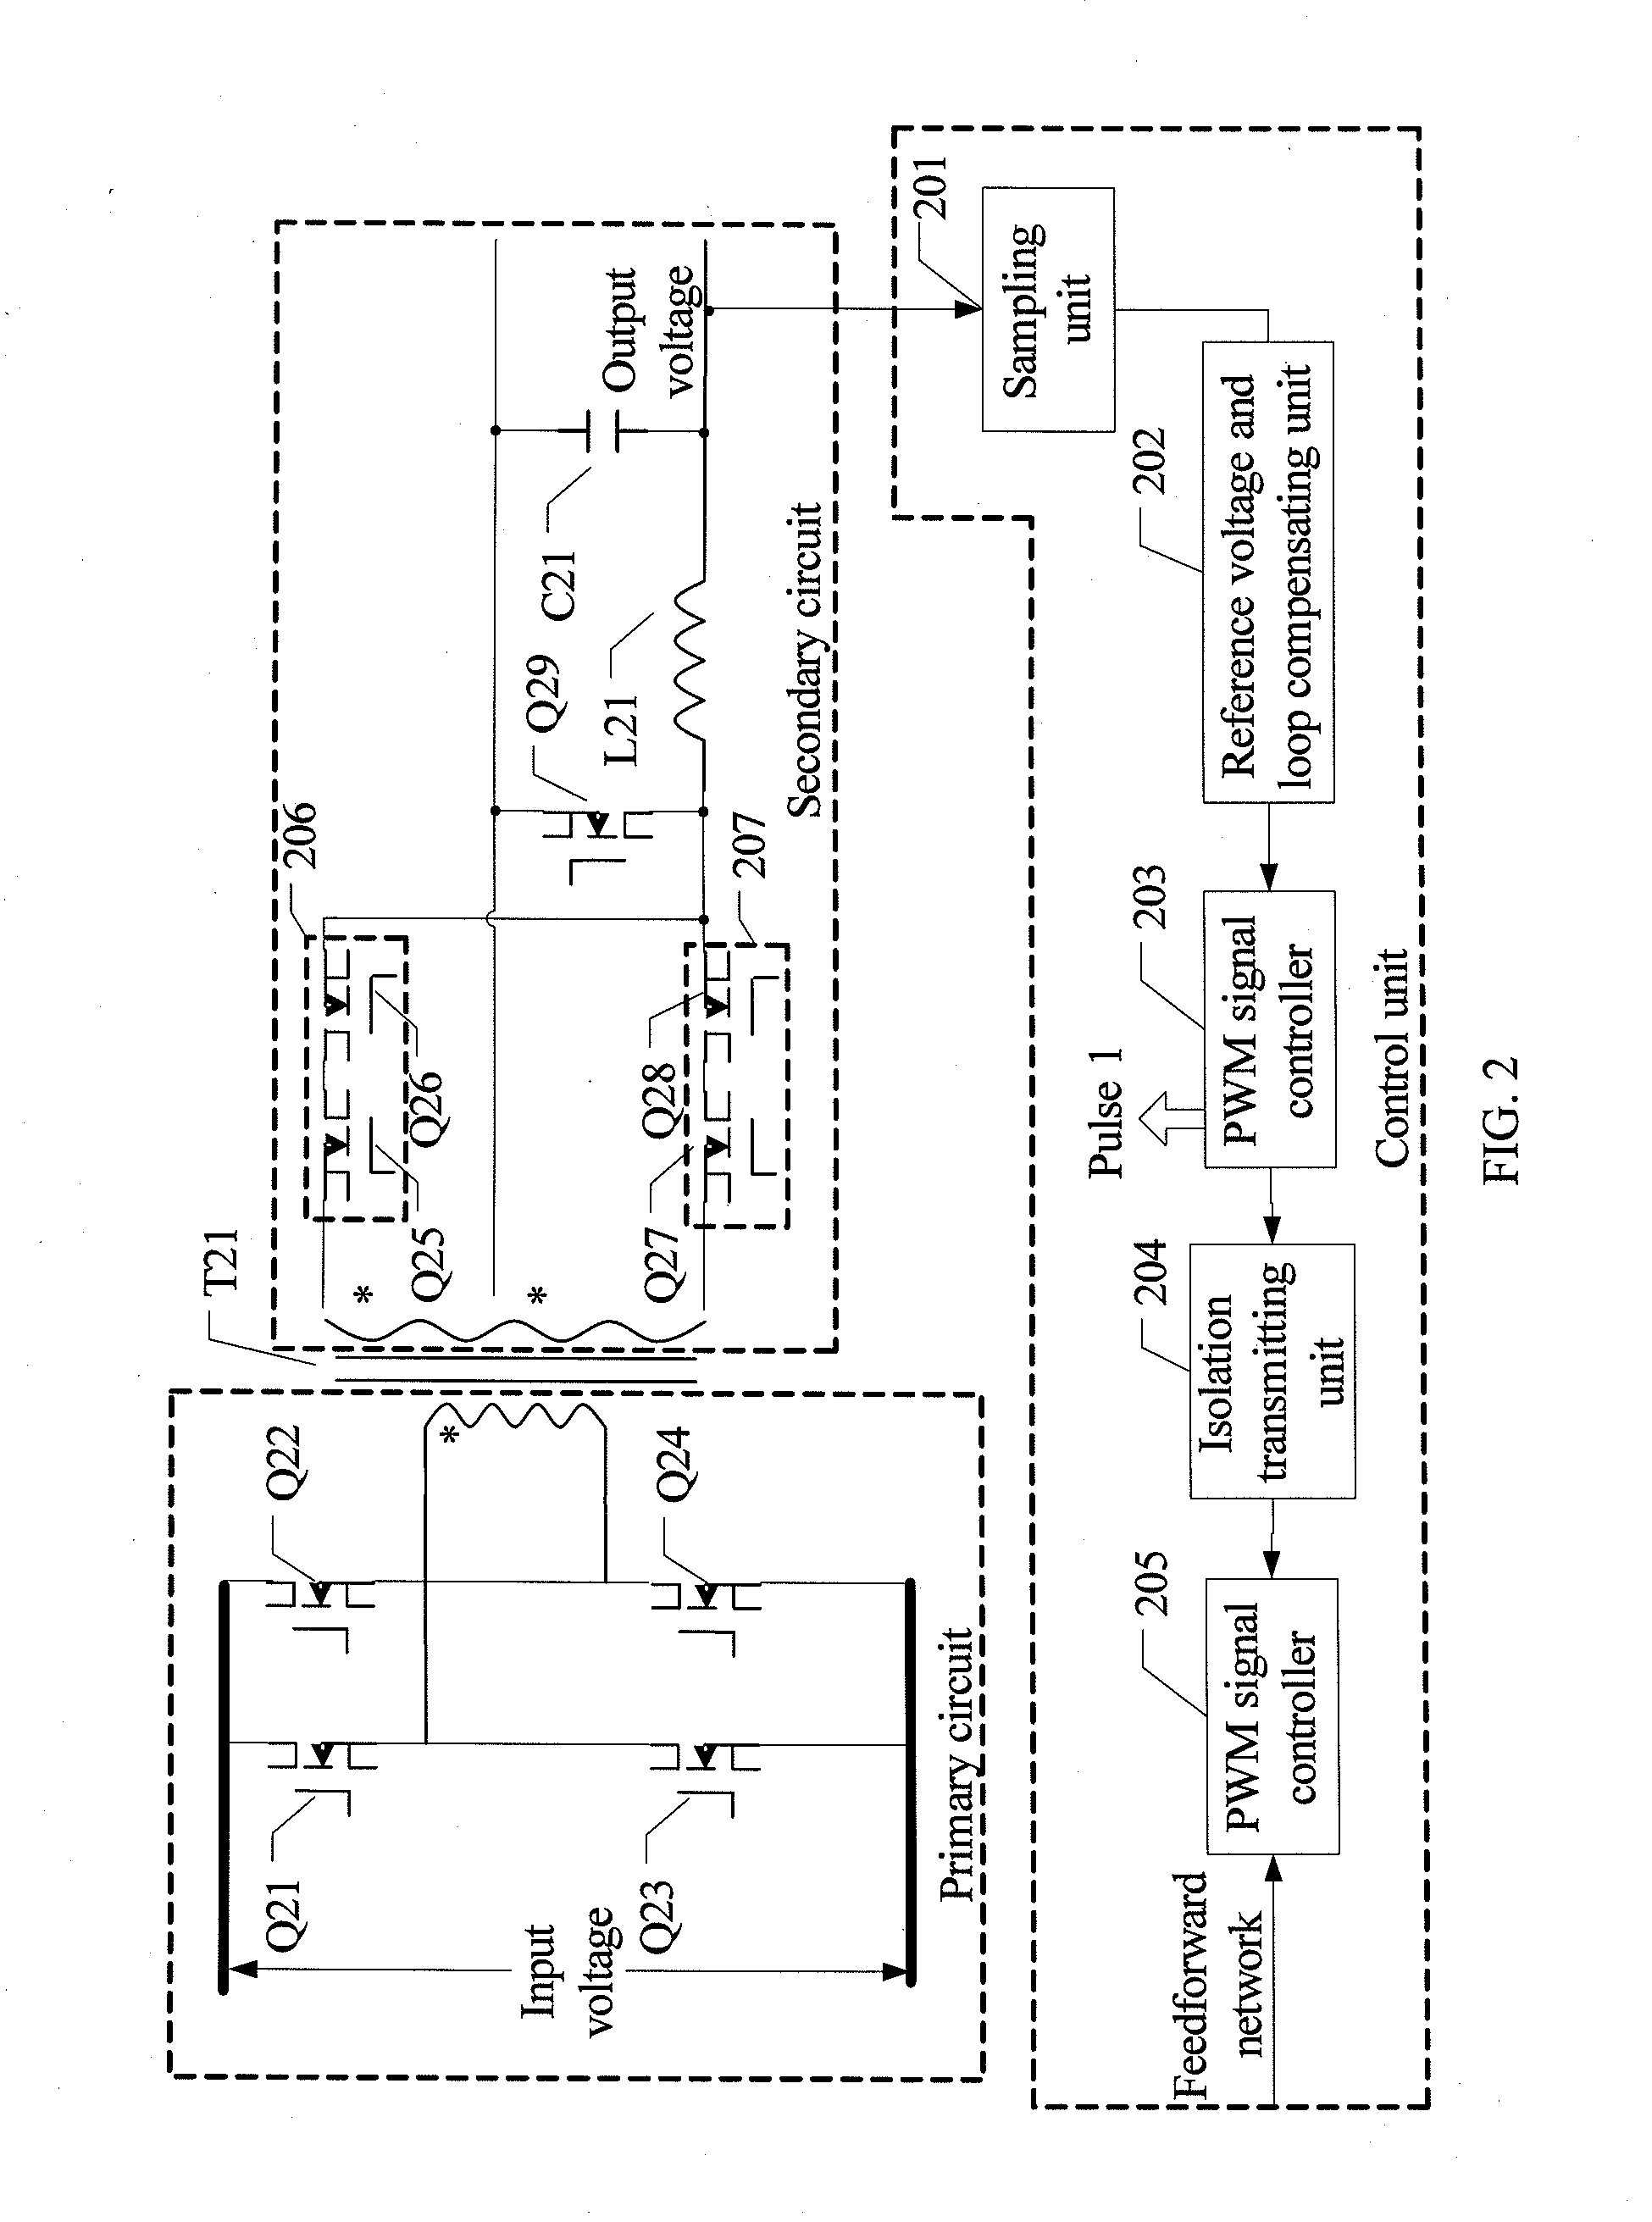 Dc-dc power supply apparatus method for improving dc-dc power supply apparatus